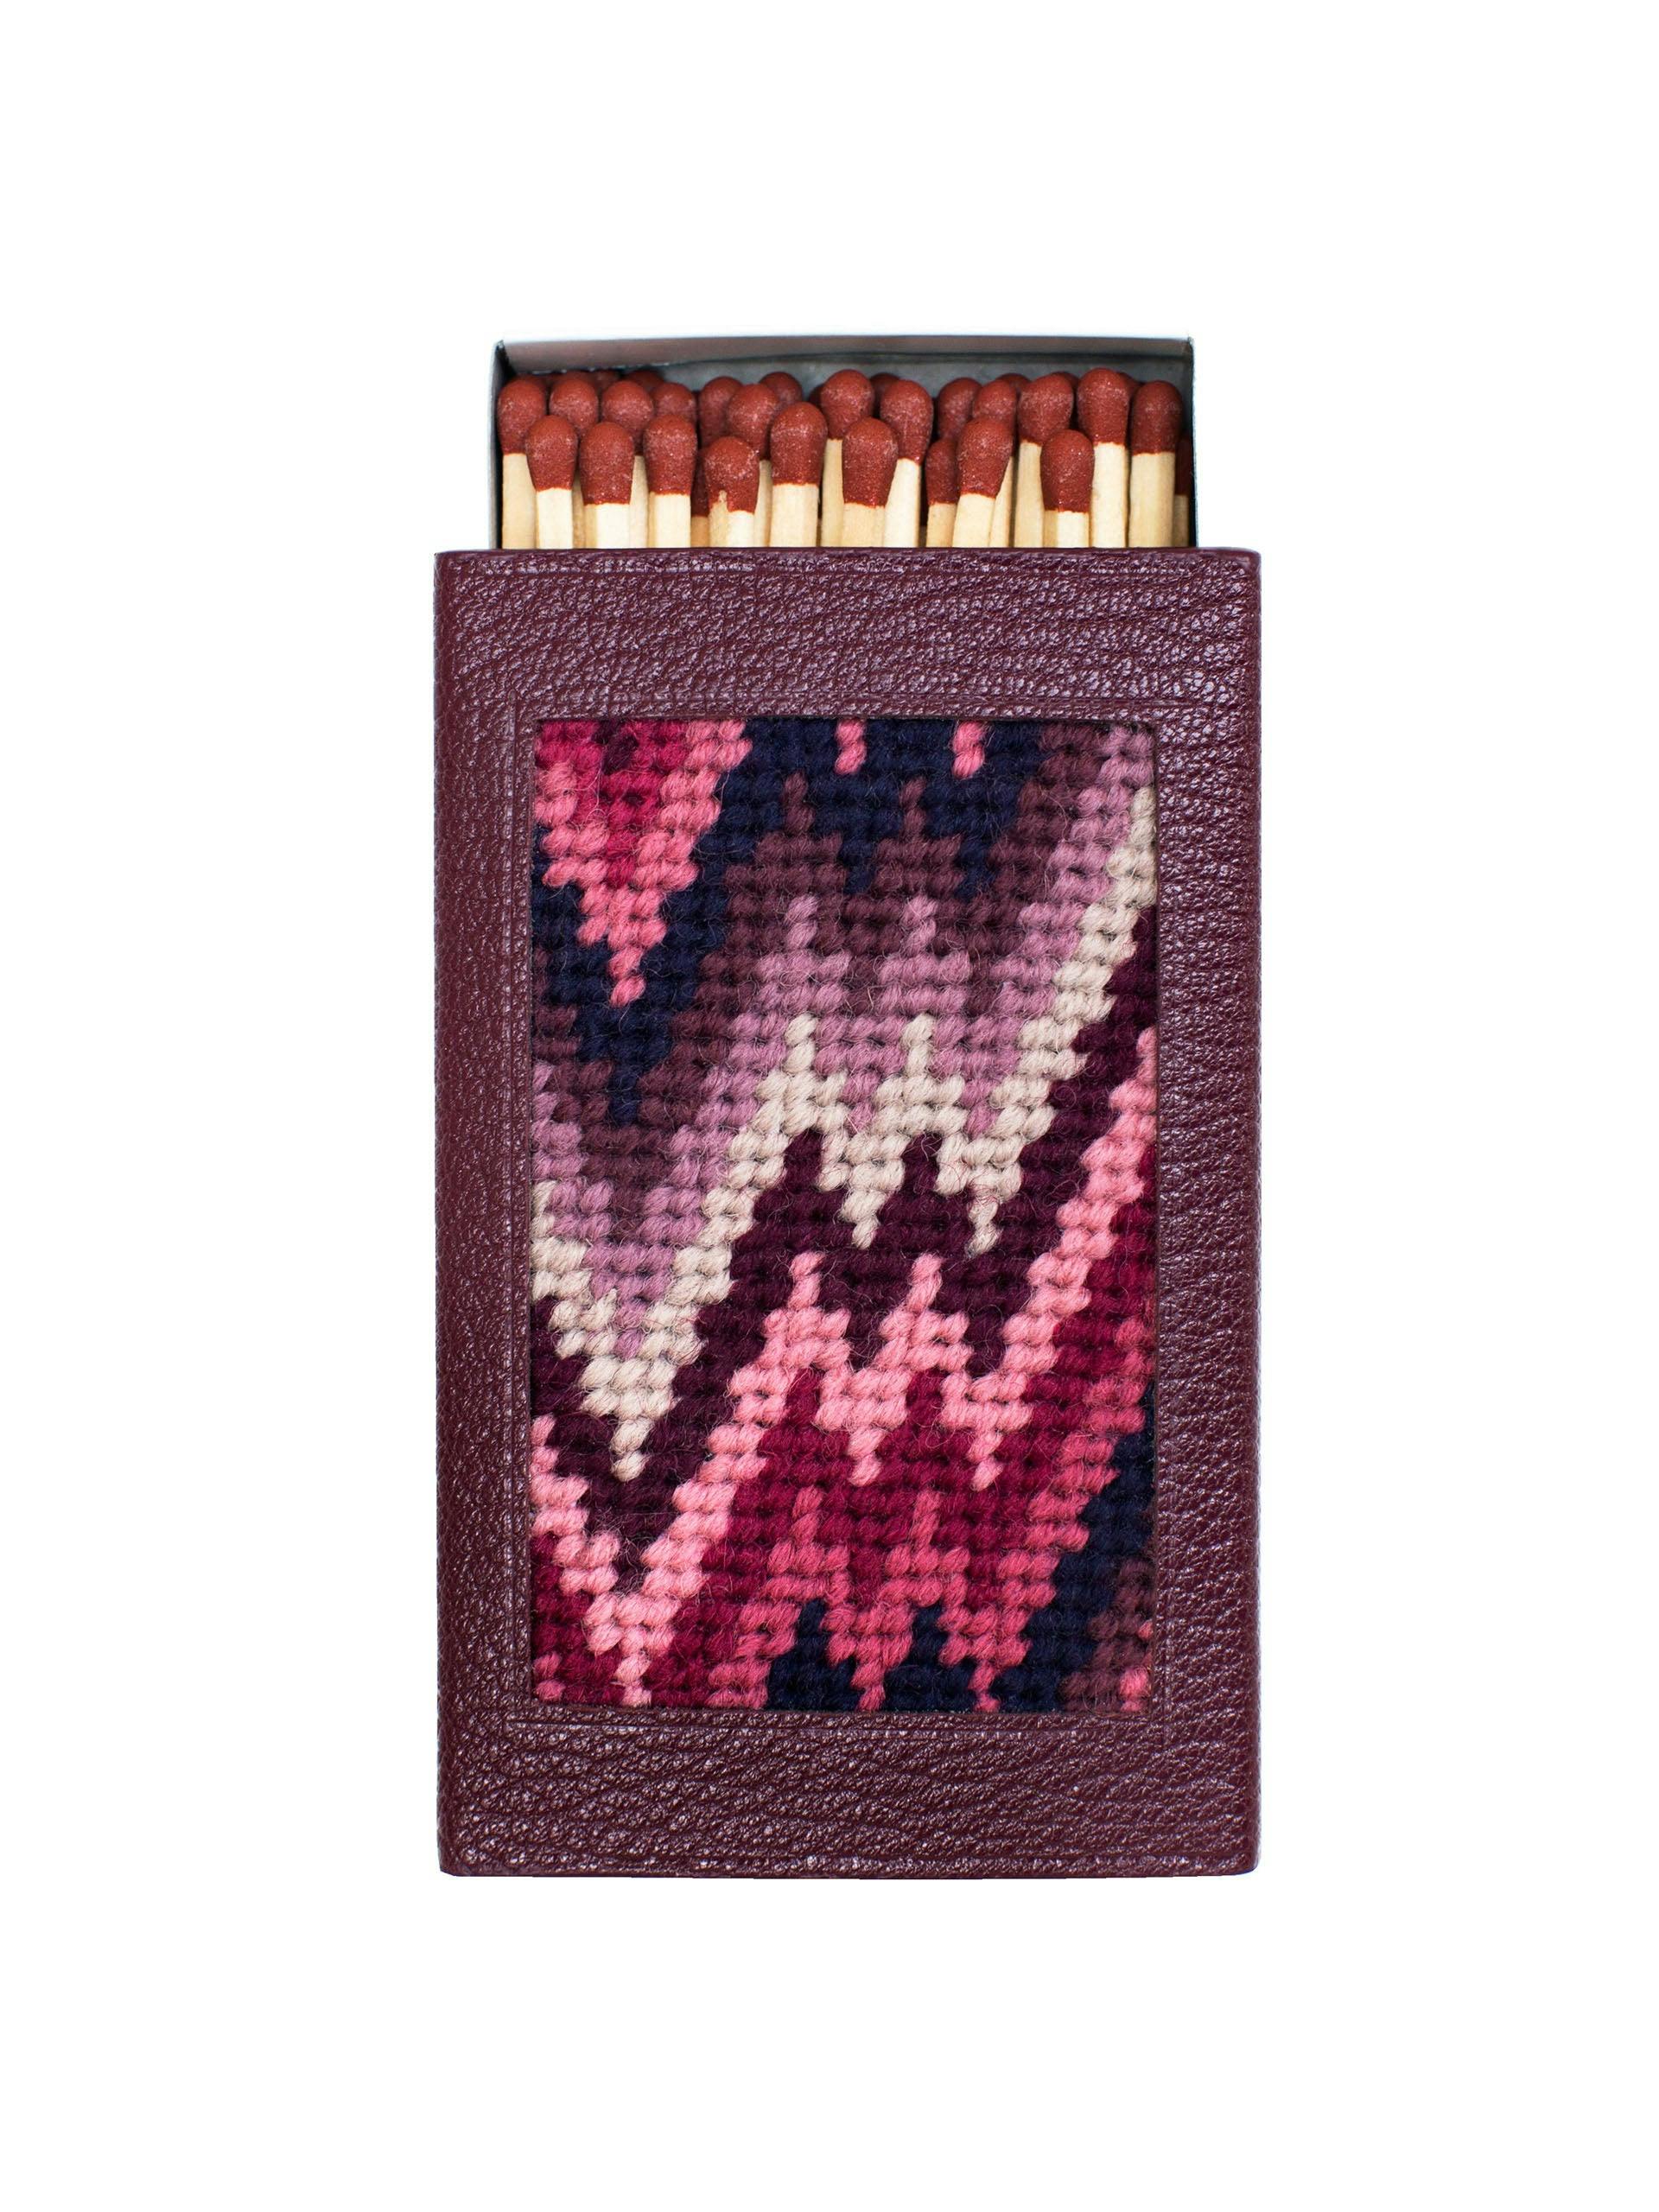 Matchbox holder in Pink and Purple